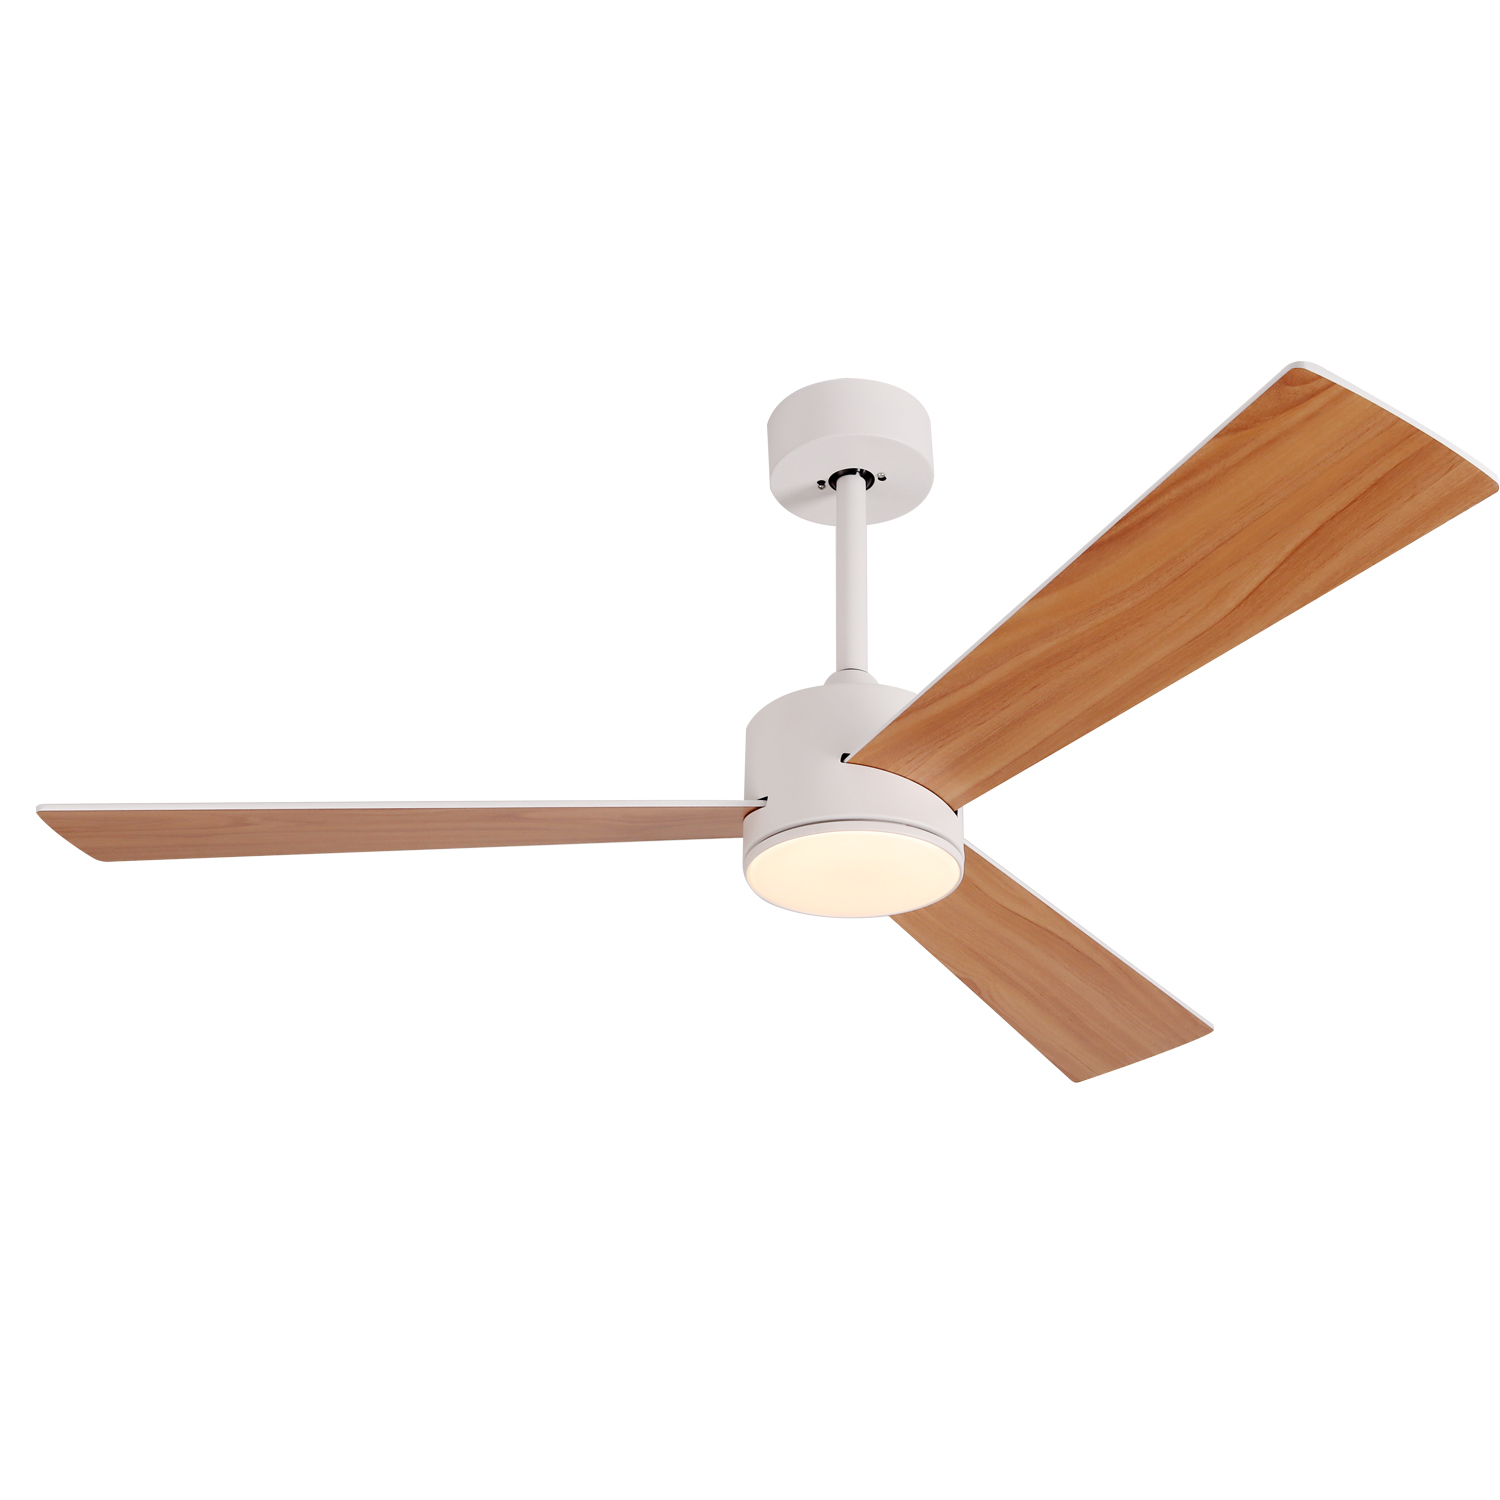 Nordic Decorative 52 Inch Chandelier Ceiling Fan Plywood Blades Remote Control Dc Bldc Celling Fan with Light